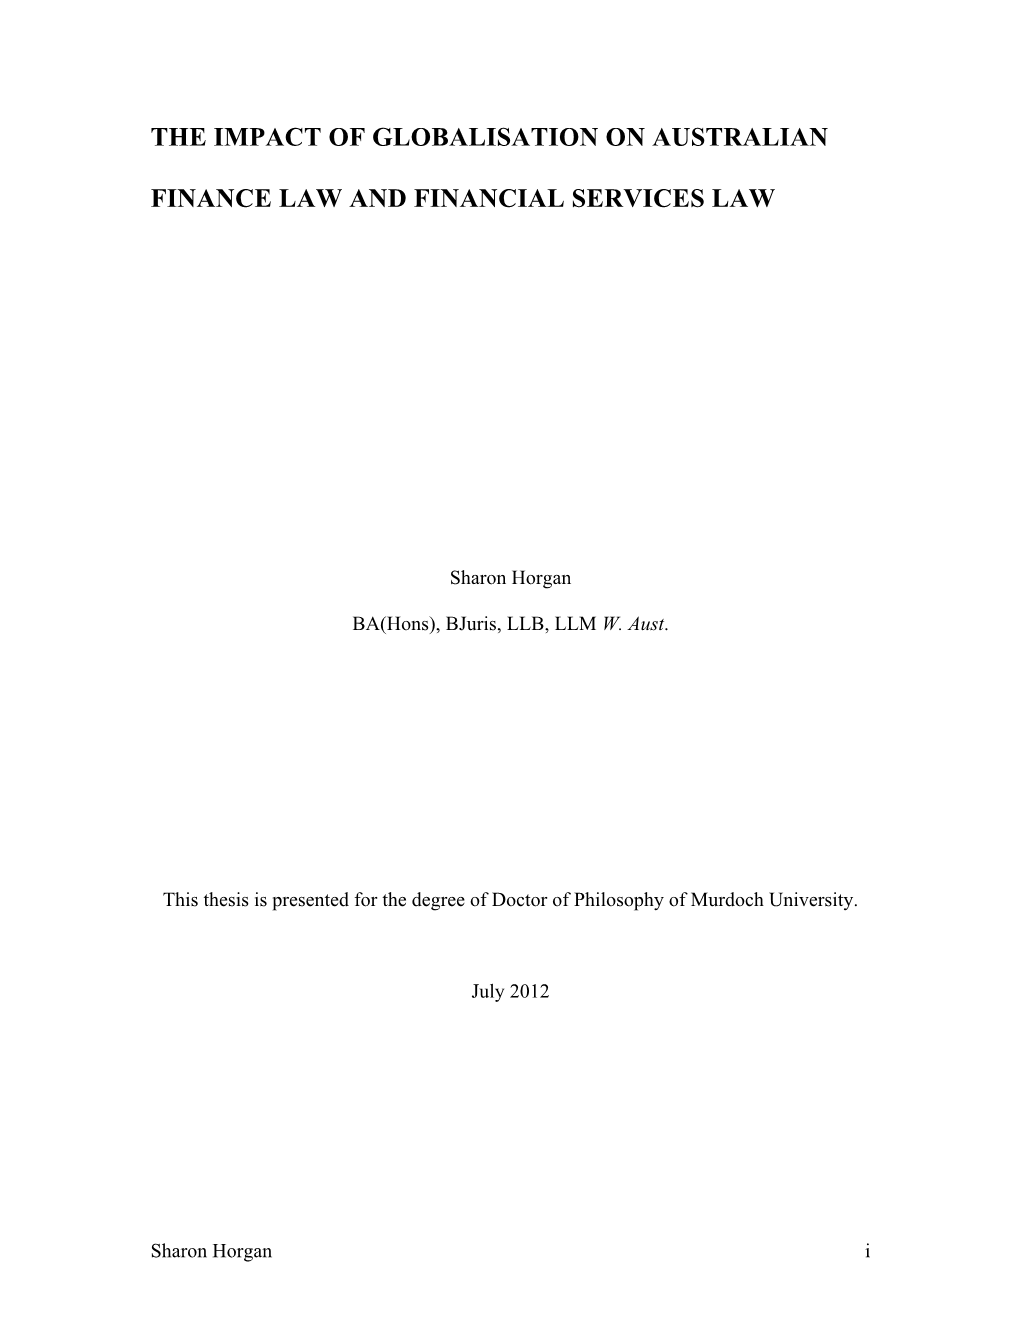 The Impact of Globalisation on Australian Finance Law and Financial Services Law Reform